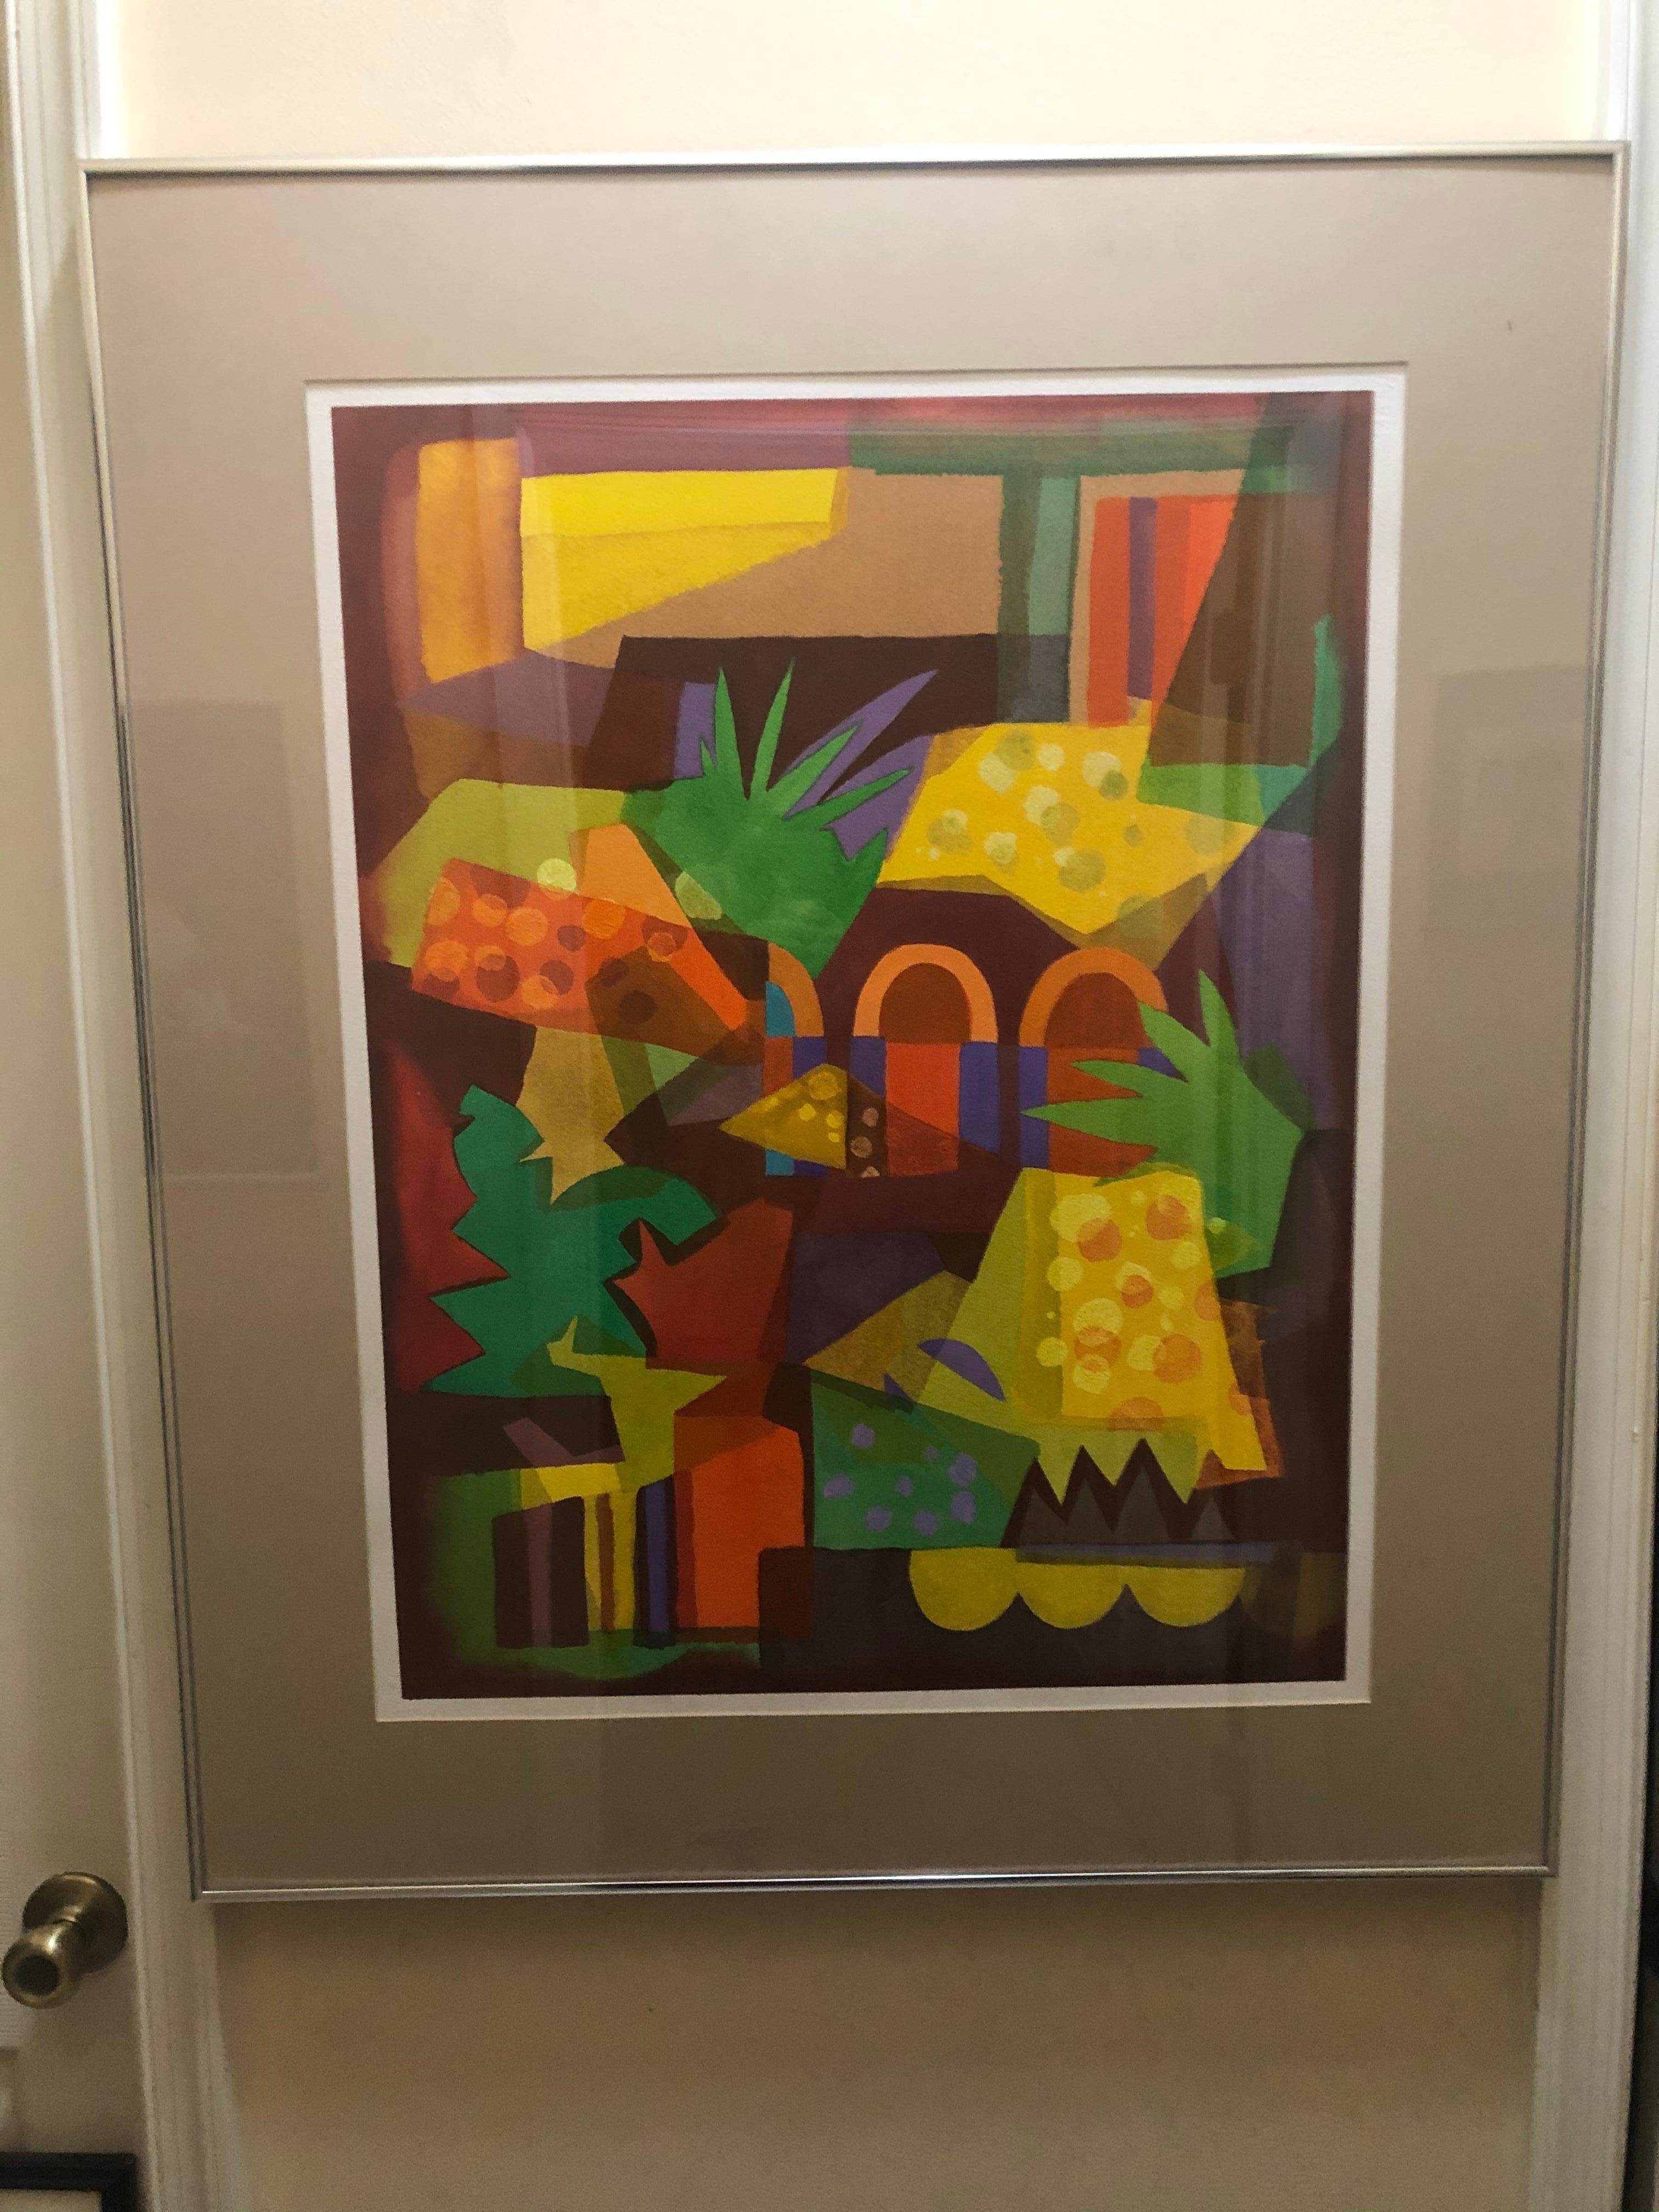 Frank Goodnow: 1923-2004. Listed American artist and professor at Syracuse University. Magnificent colors in this rarely available Frank Goodnow Painting. It is in the cubist style. It measures 27 inches high by 21 1/2 inches wide the frame is 36” x